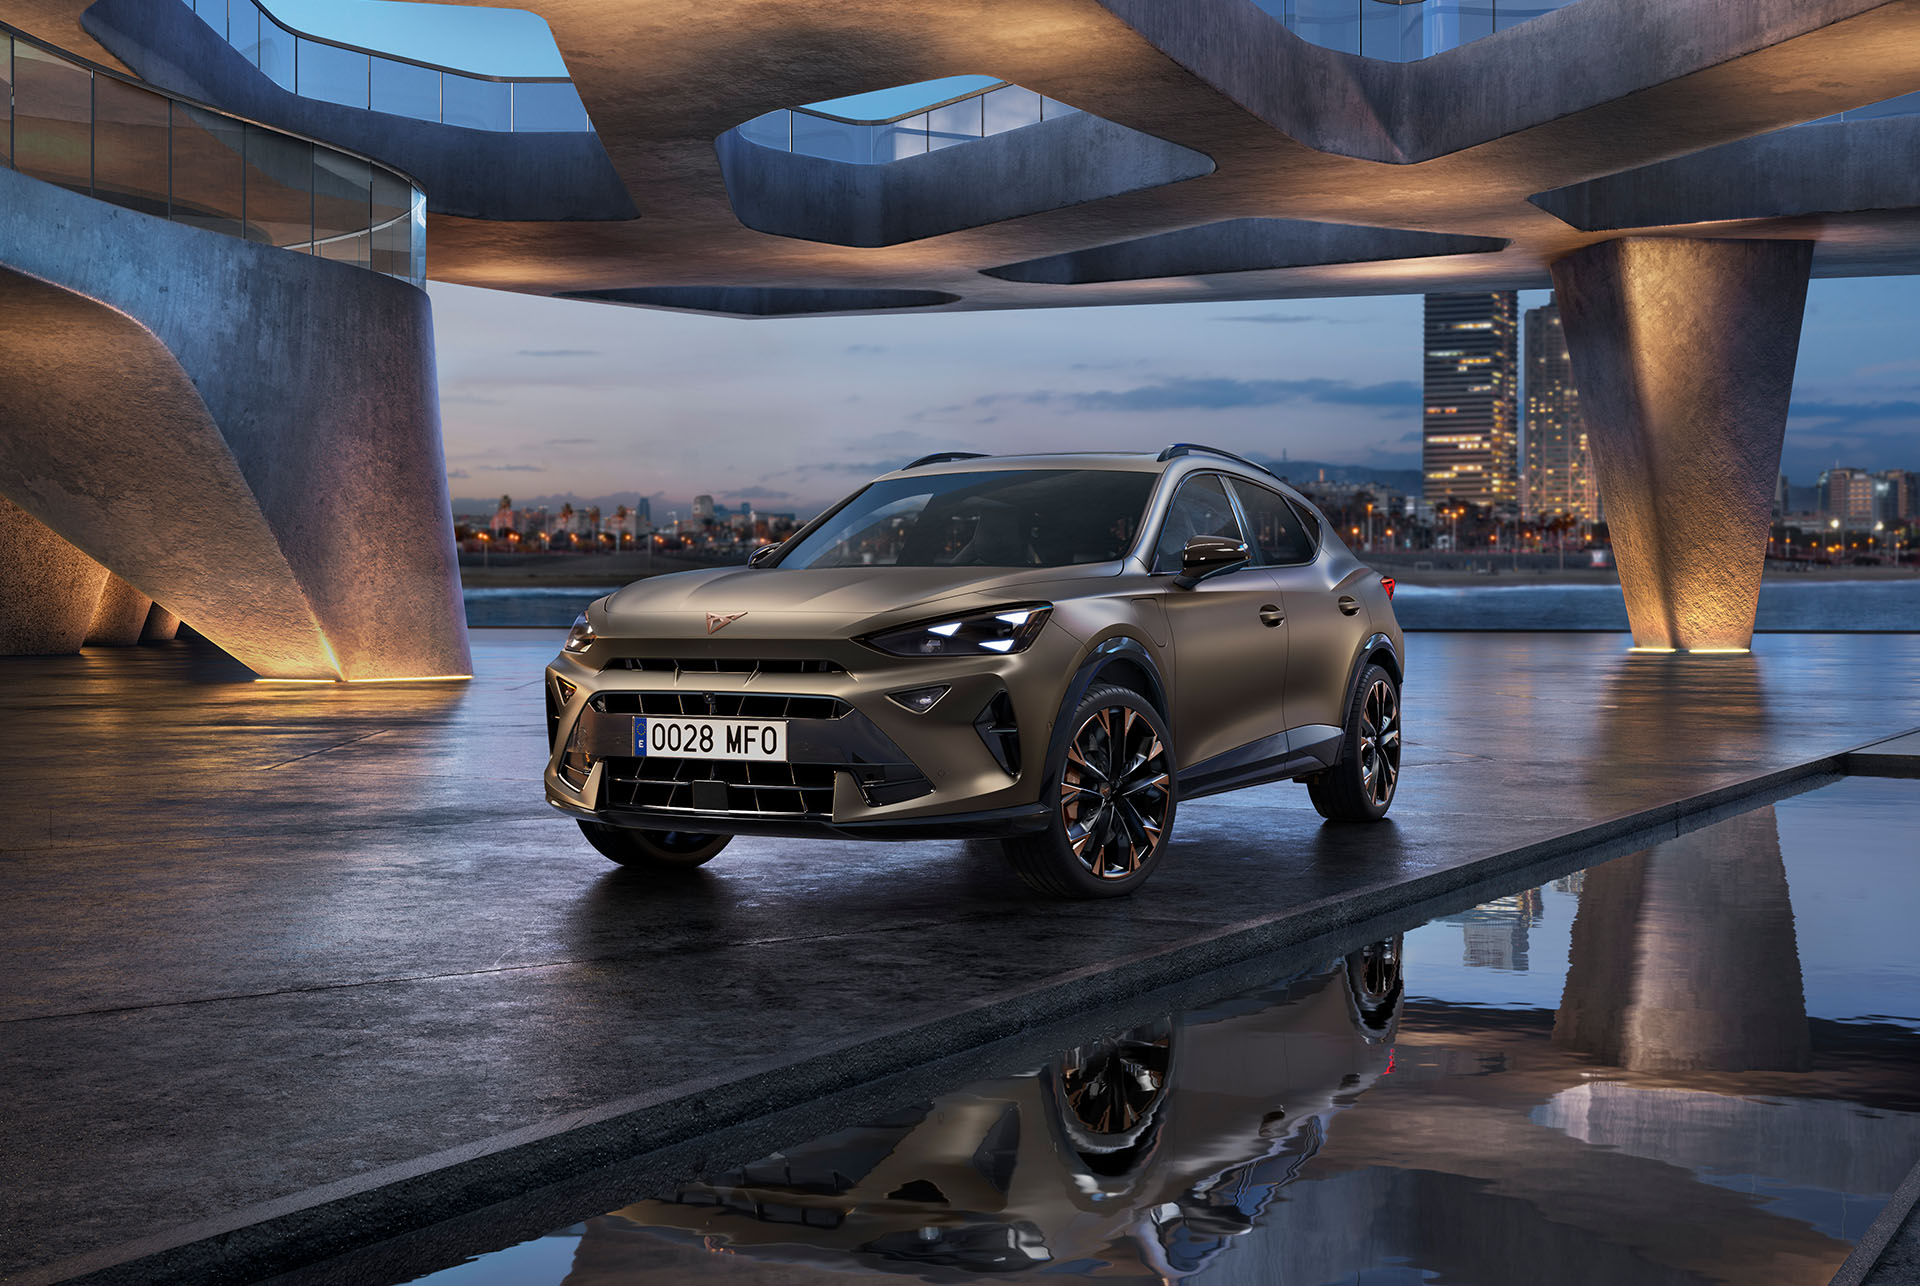 The 2024 Century bronze matt CUPRA Formentor parked on a reflective waterfront promenade. The sporty and aerodynamic new vehicle is positioned centre frame. The setting features futuristic architecture and Barcelona’s glowing city skyline at dusk.